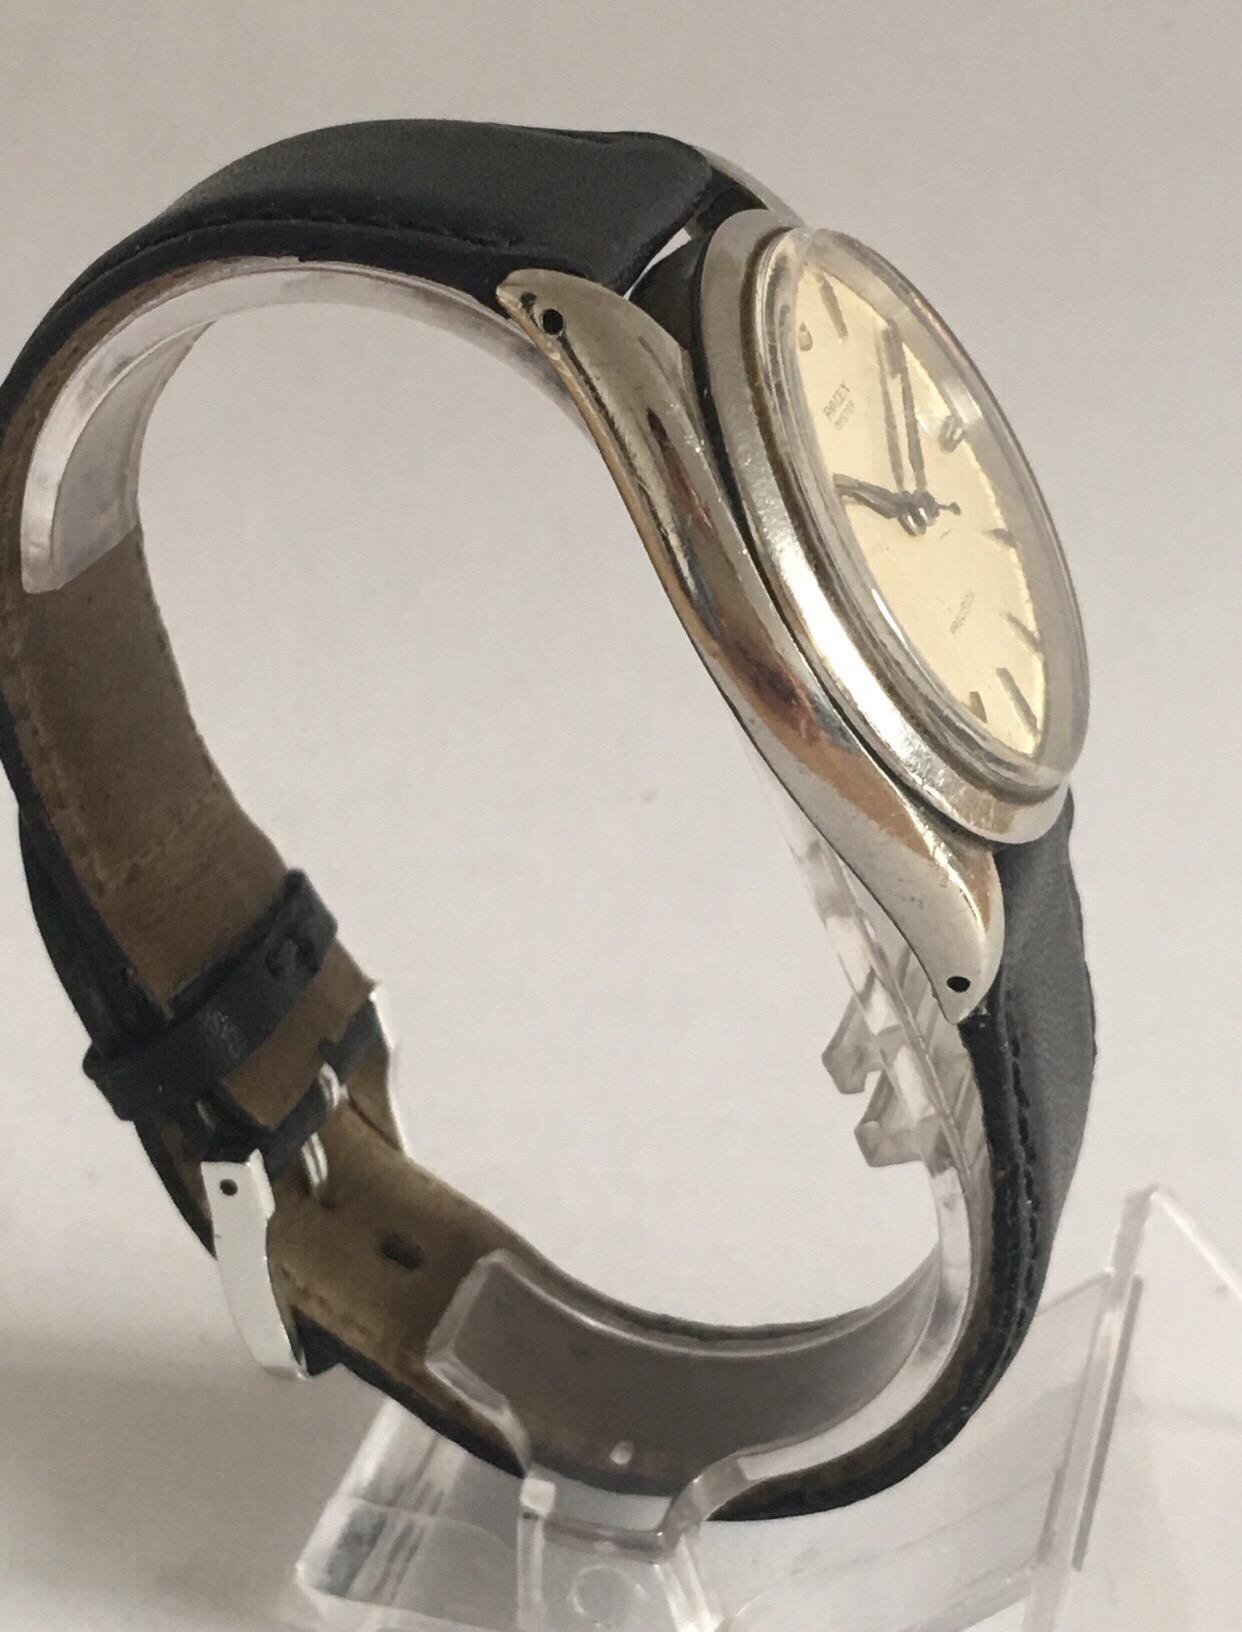 Vintage 1940s Rolex Oyster Precesion In Good Condition For Sale In Carlisle, GB